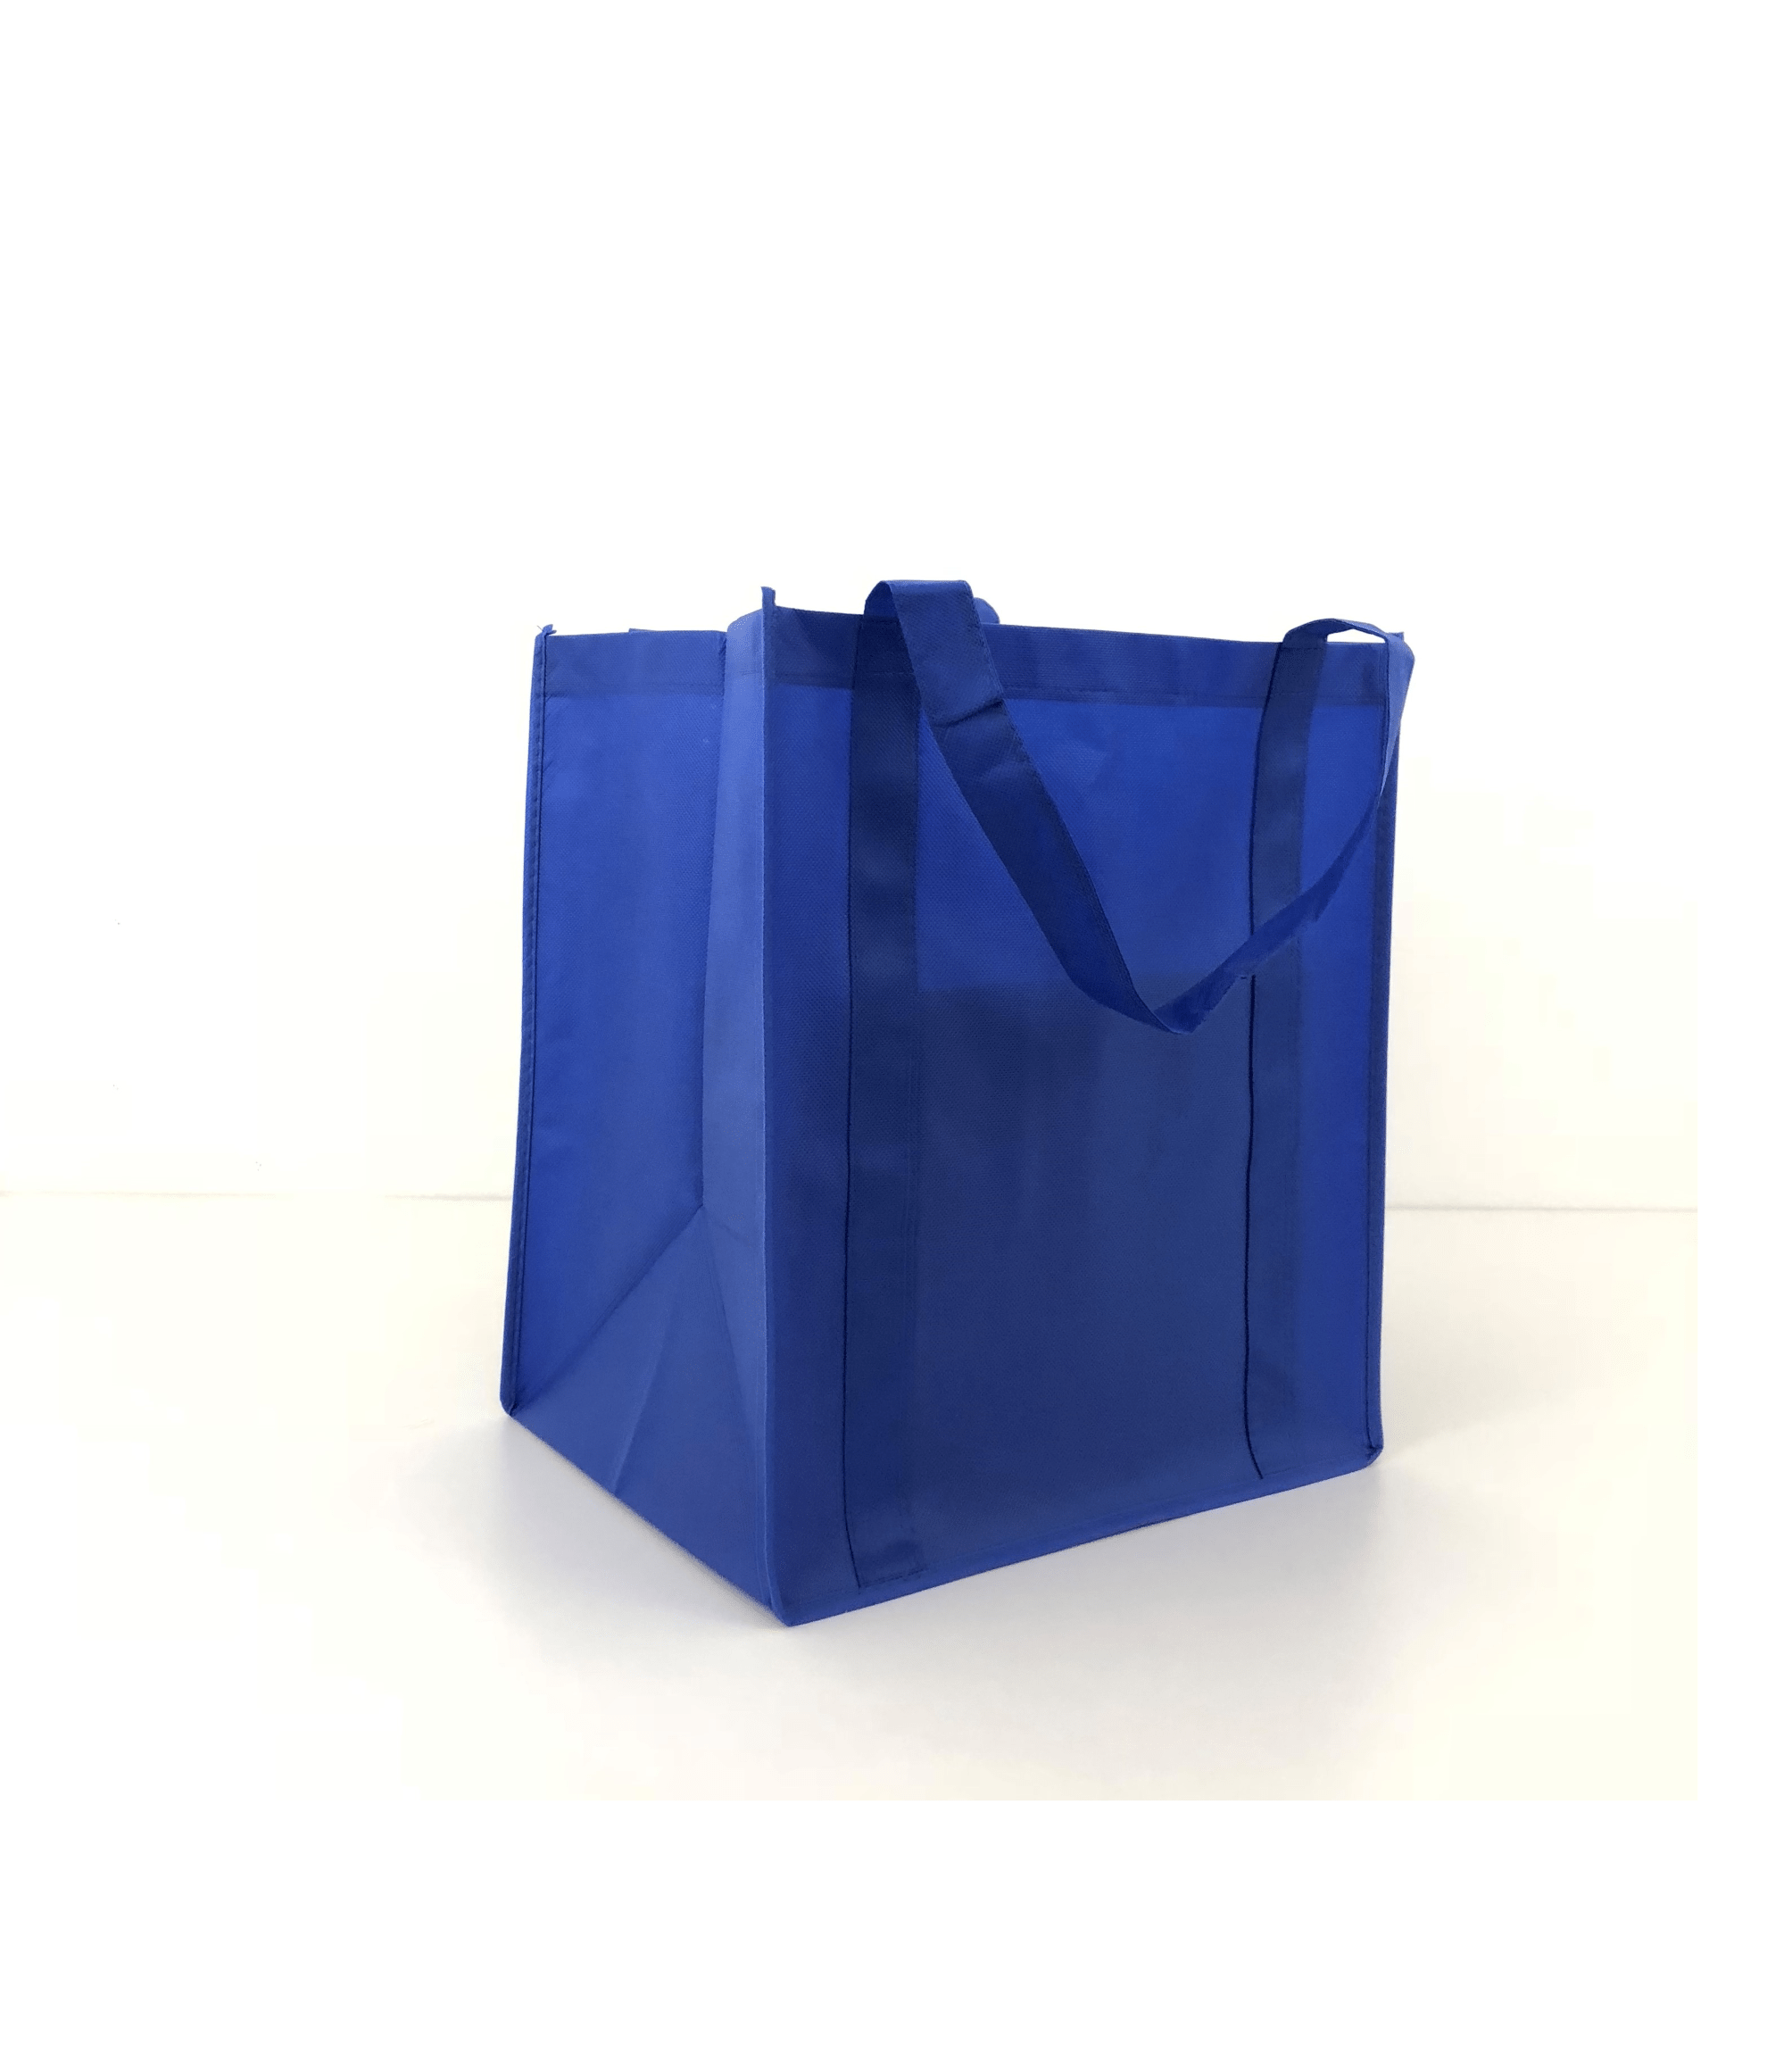 3 Pack of Reusable Canvas Tote Bags for Grocery Shopping (3 Designs, Small,  15x16.5 in) 